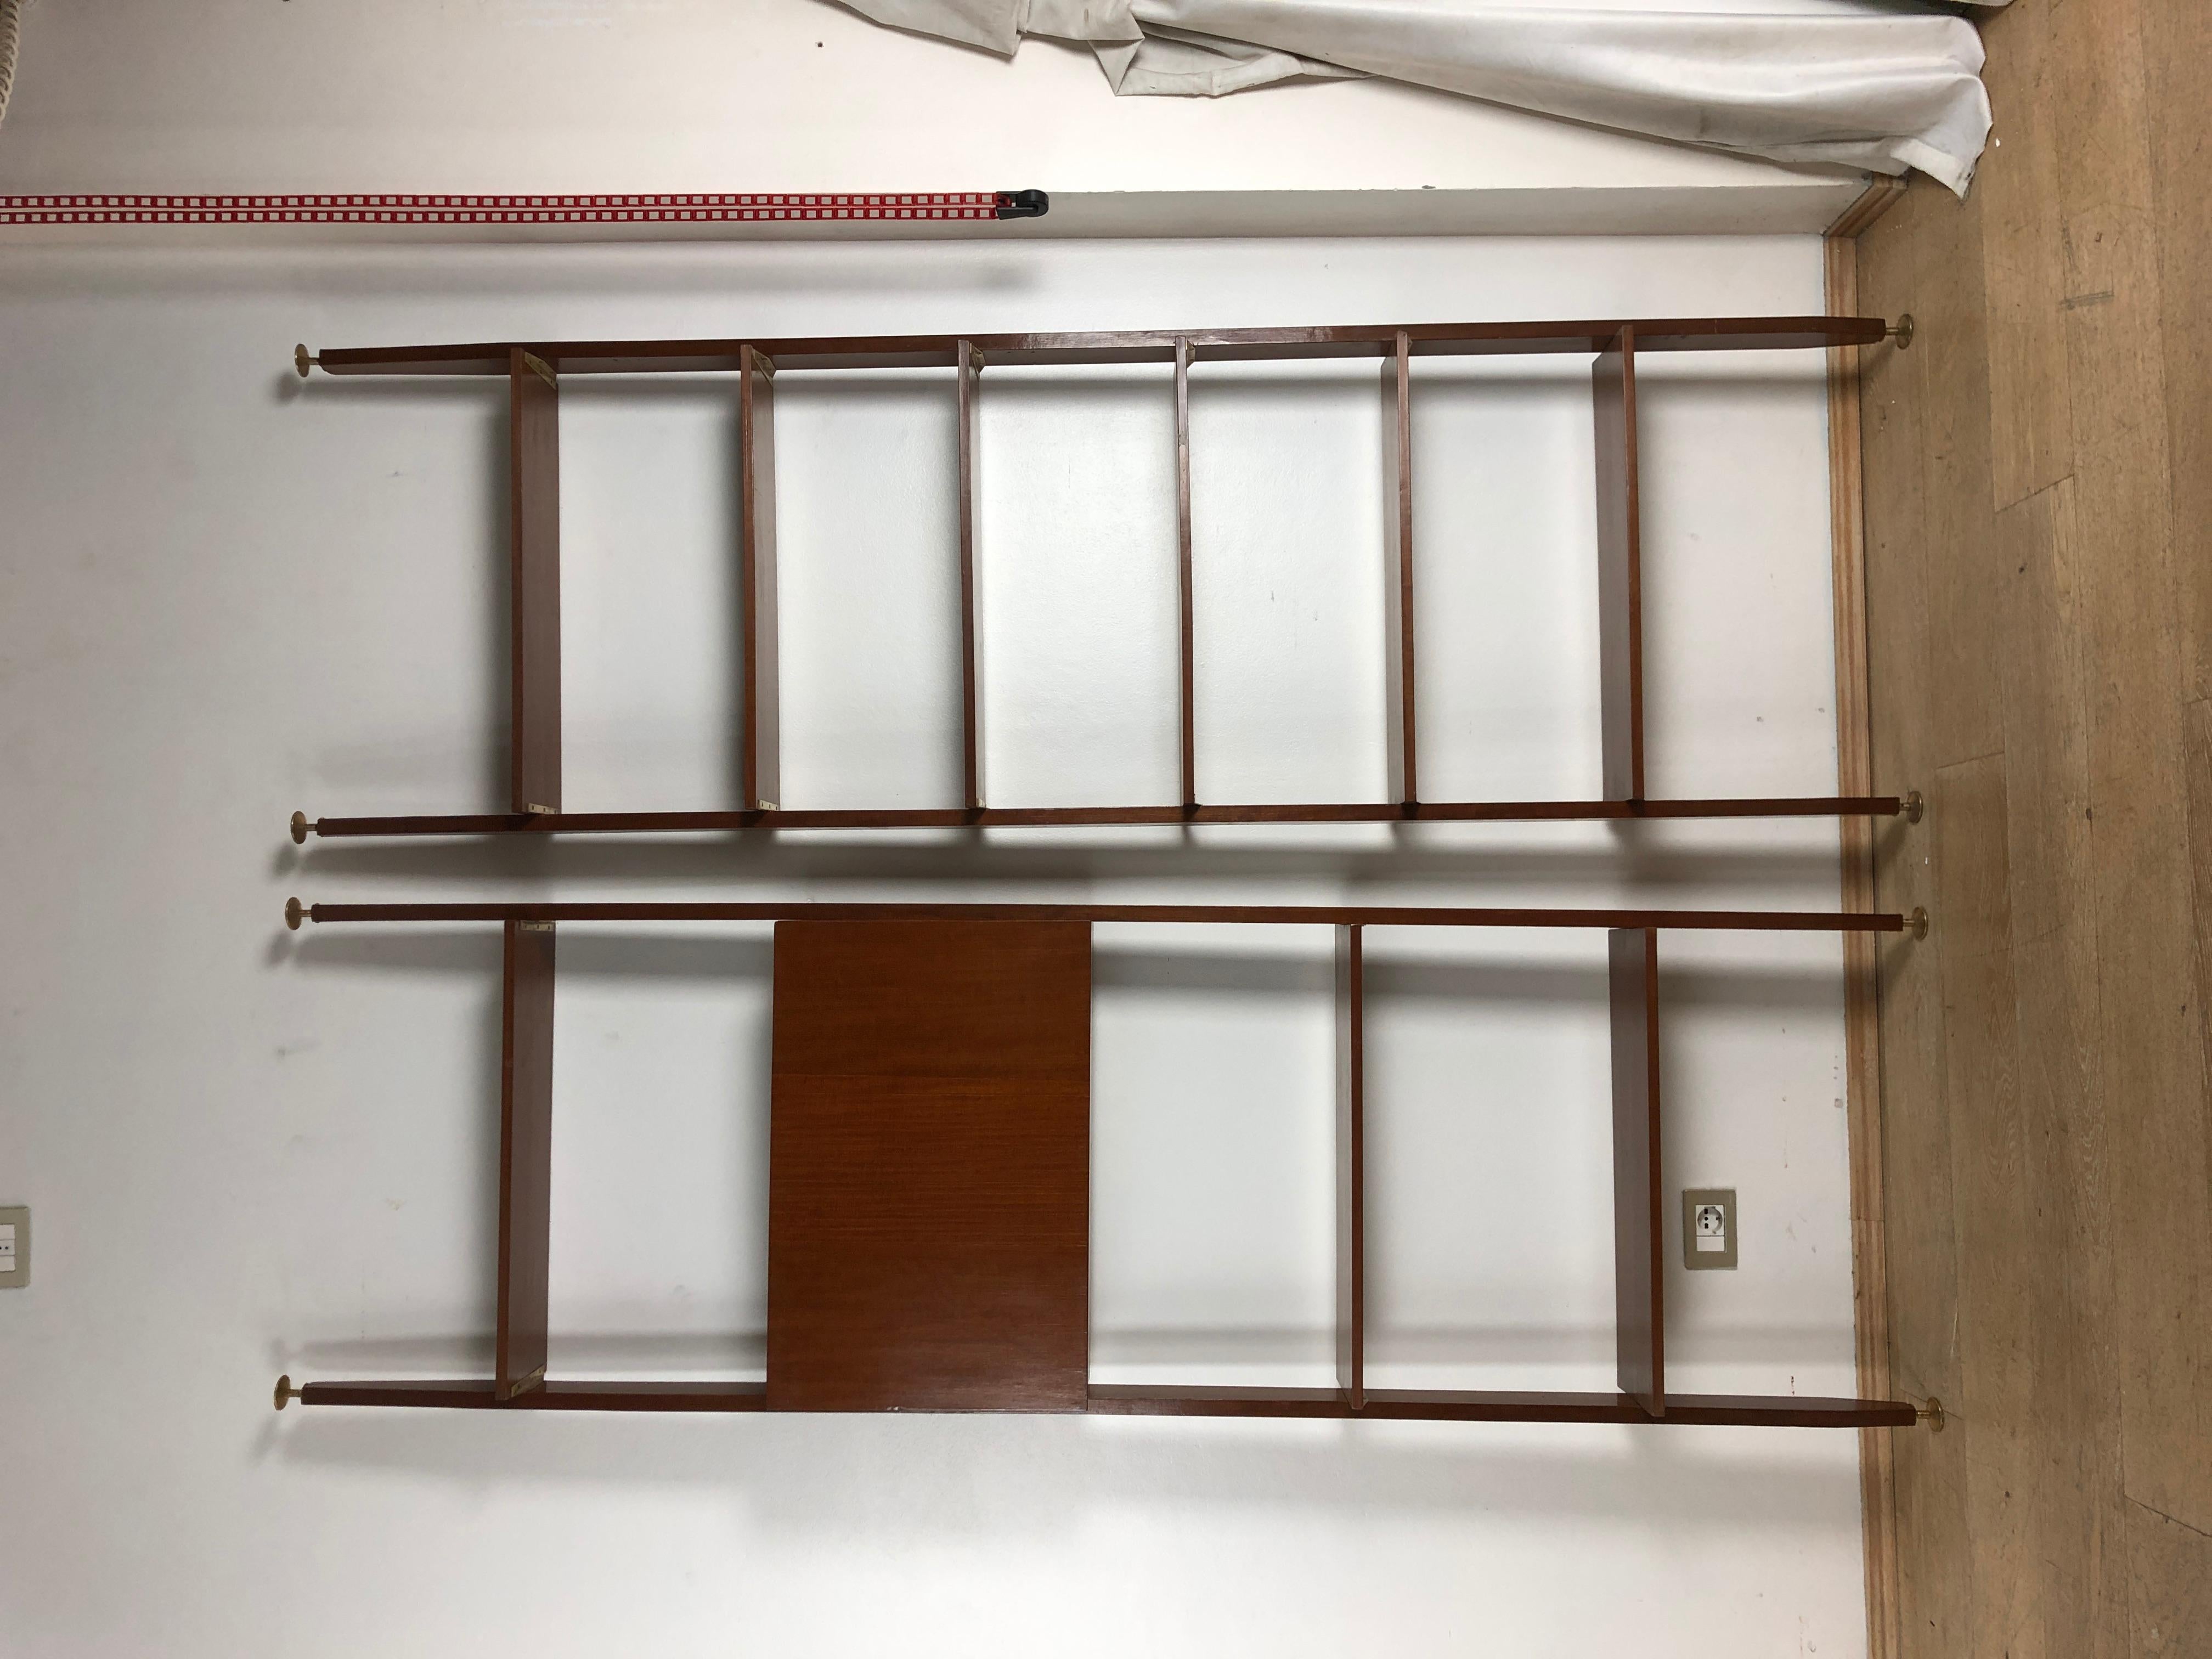 Modular mahogany pair of bookcases consisting of vertical supports, a storage unit with swing door, and adjustable shelves. 
The structure can be fixed both to the ceiling and to the wall with brackets. Each bookcase module measures H 240 cm W 73